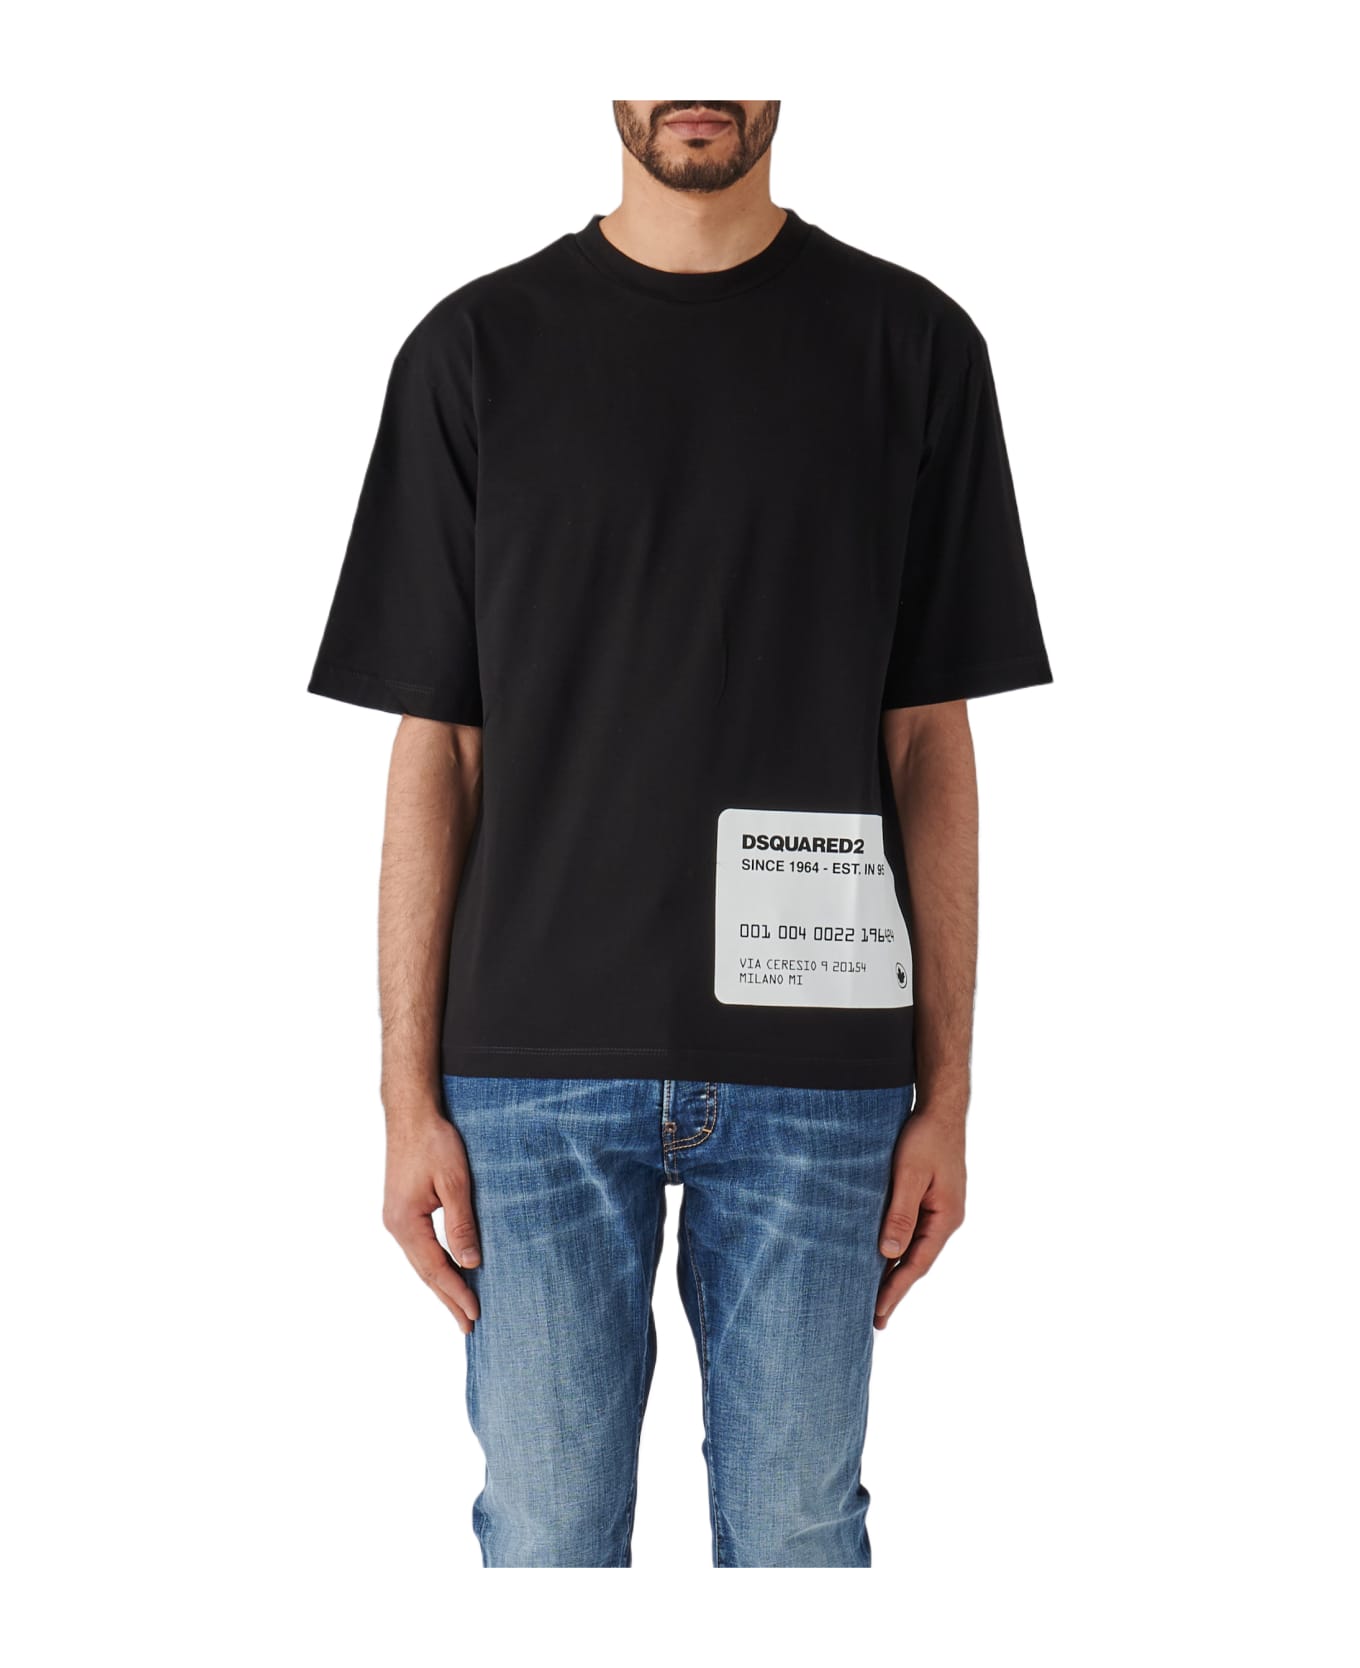 Dsquared2 Loose Fit Tee T-shirt - NERO